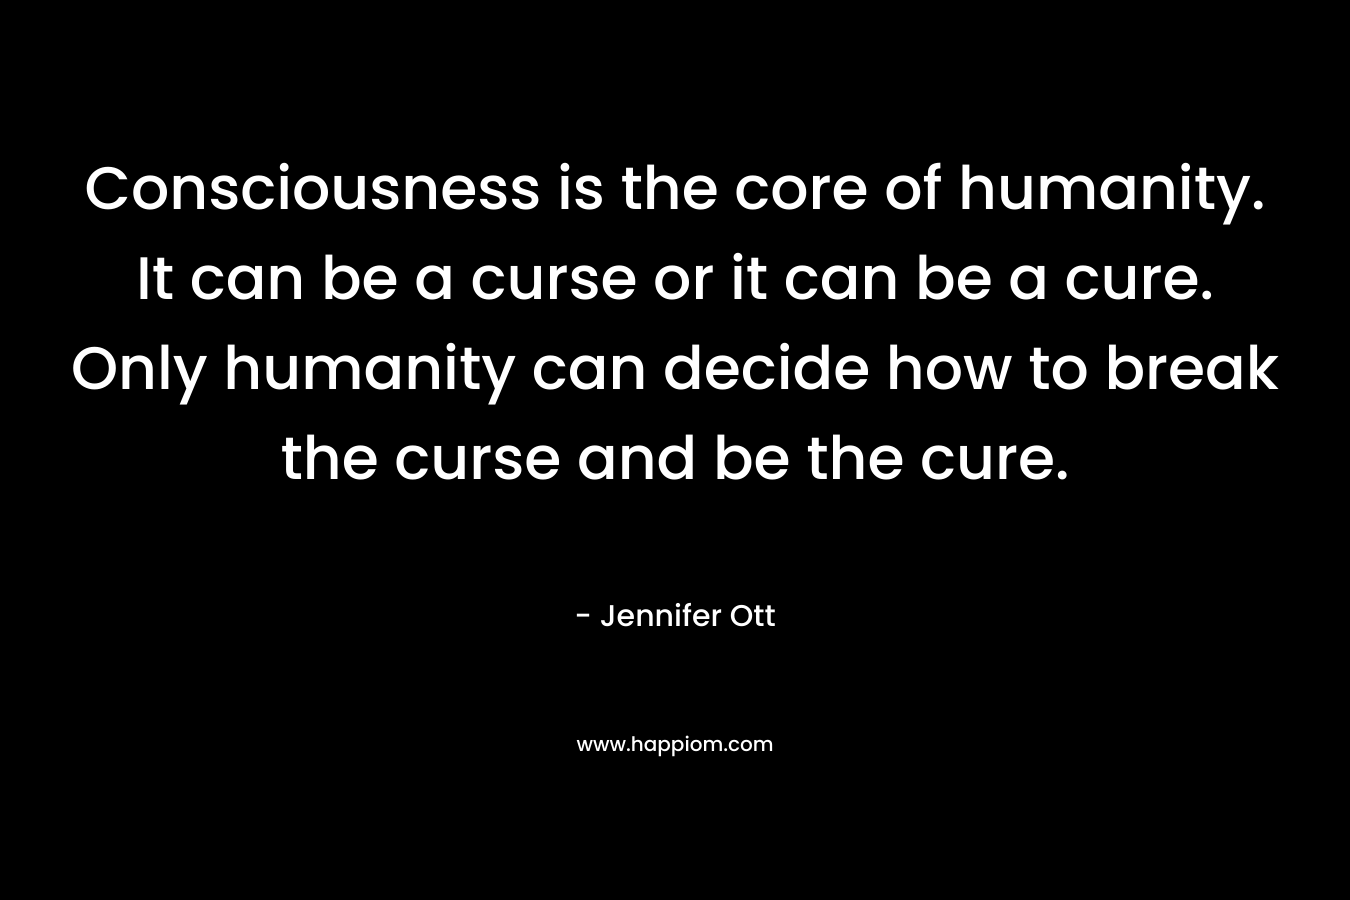 Consciousness is the core of humanity. It can be a curse or it can be a cure. Only humanity can decide how to break the curse and be the cure.